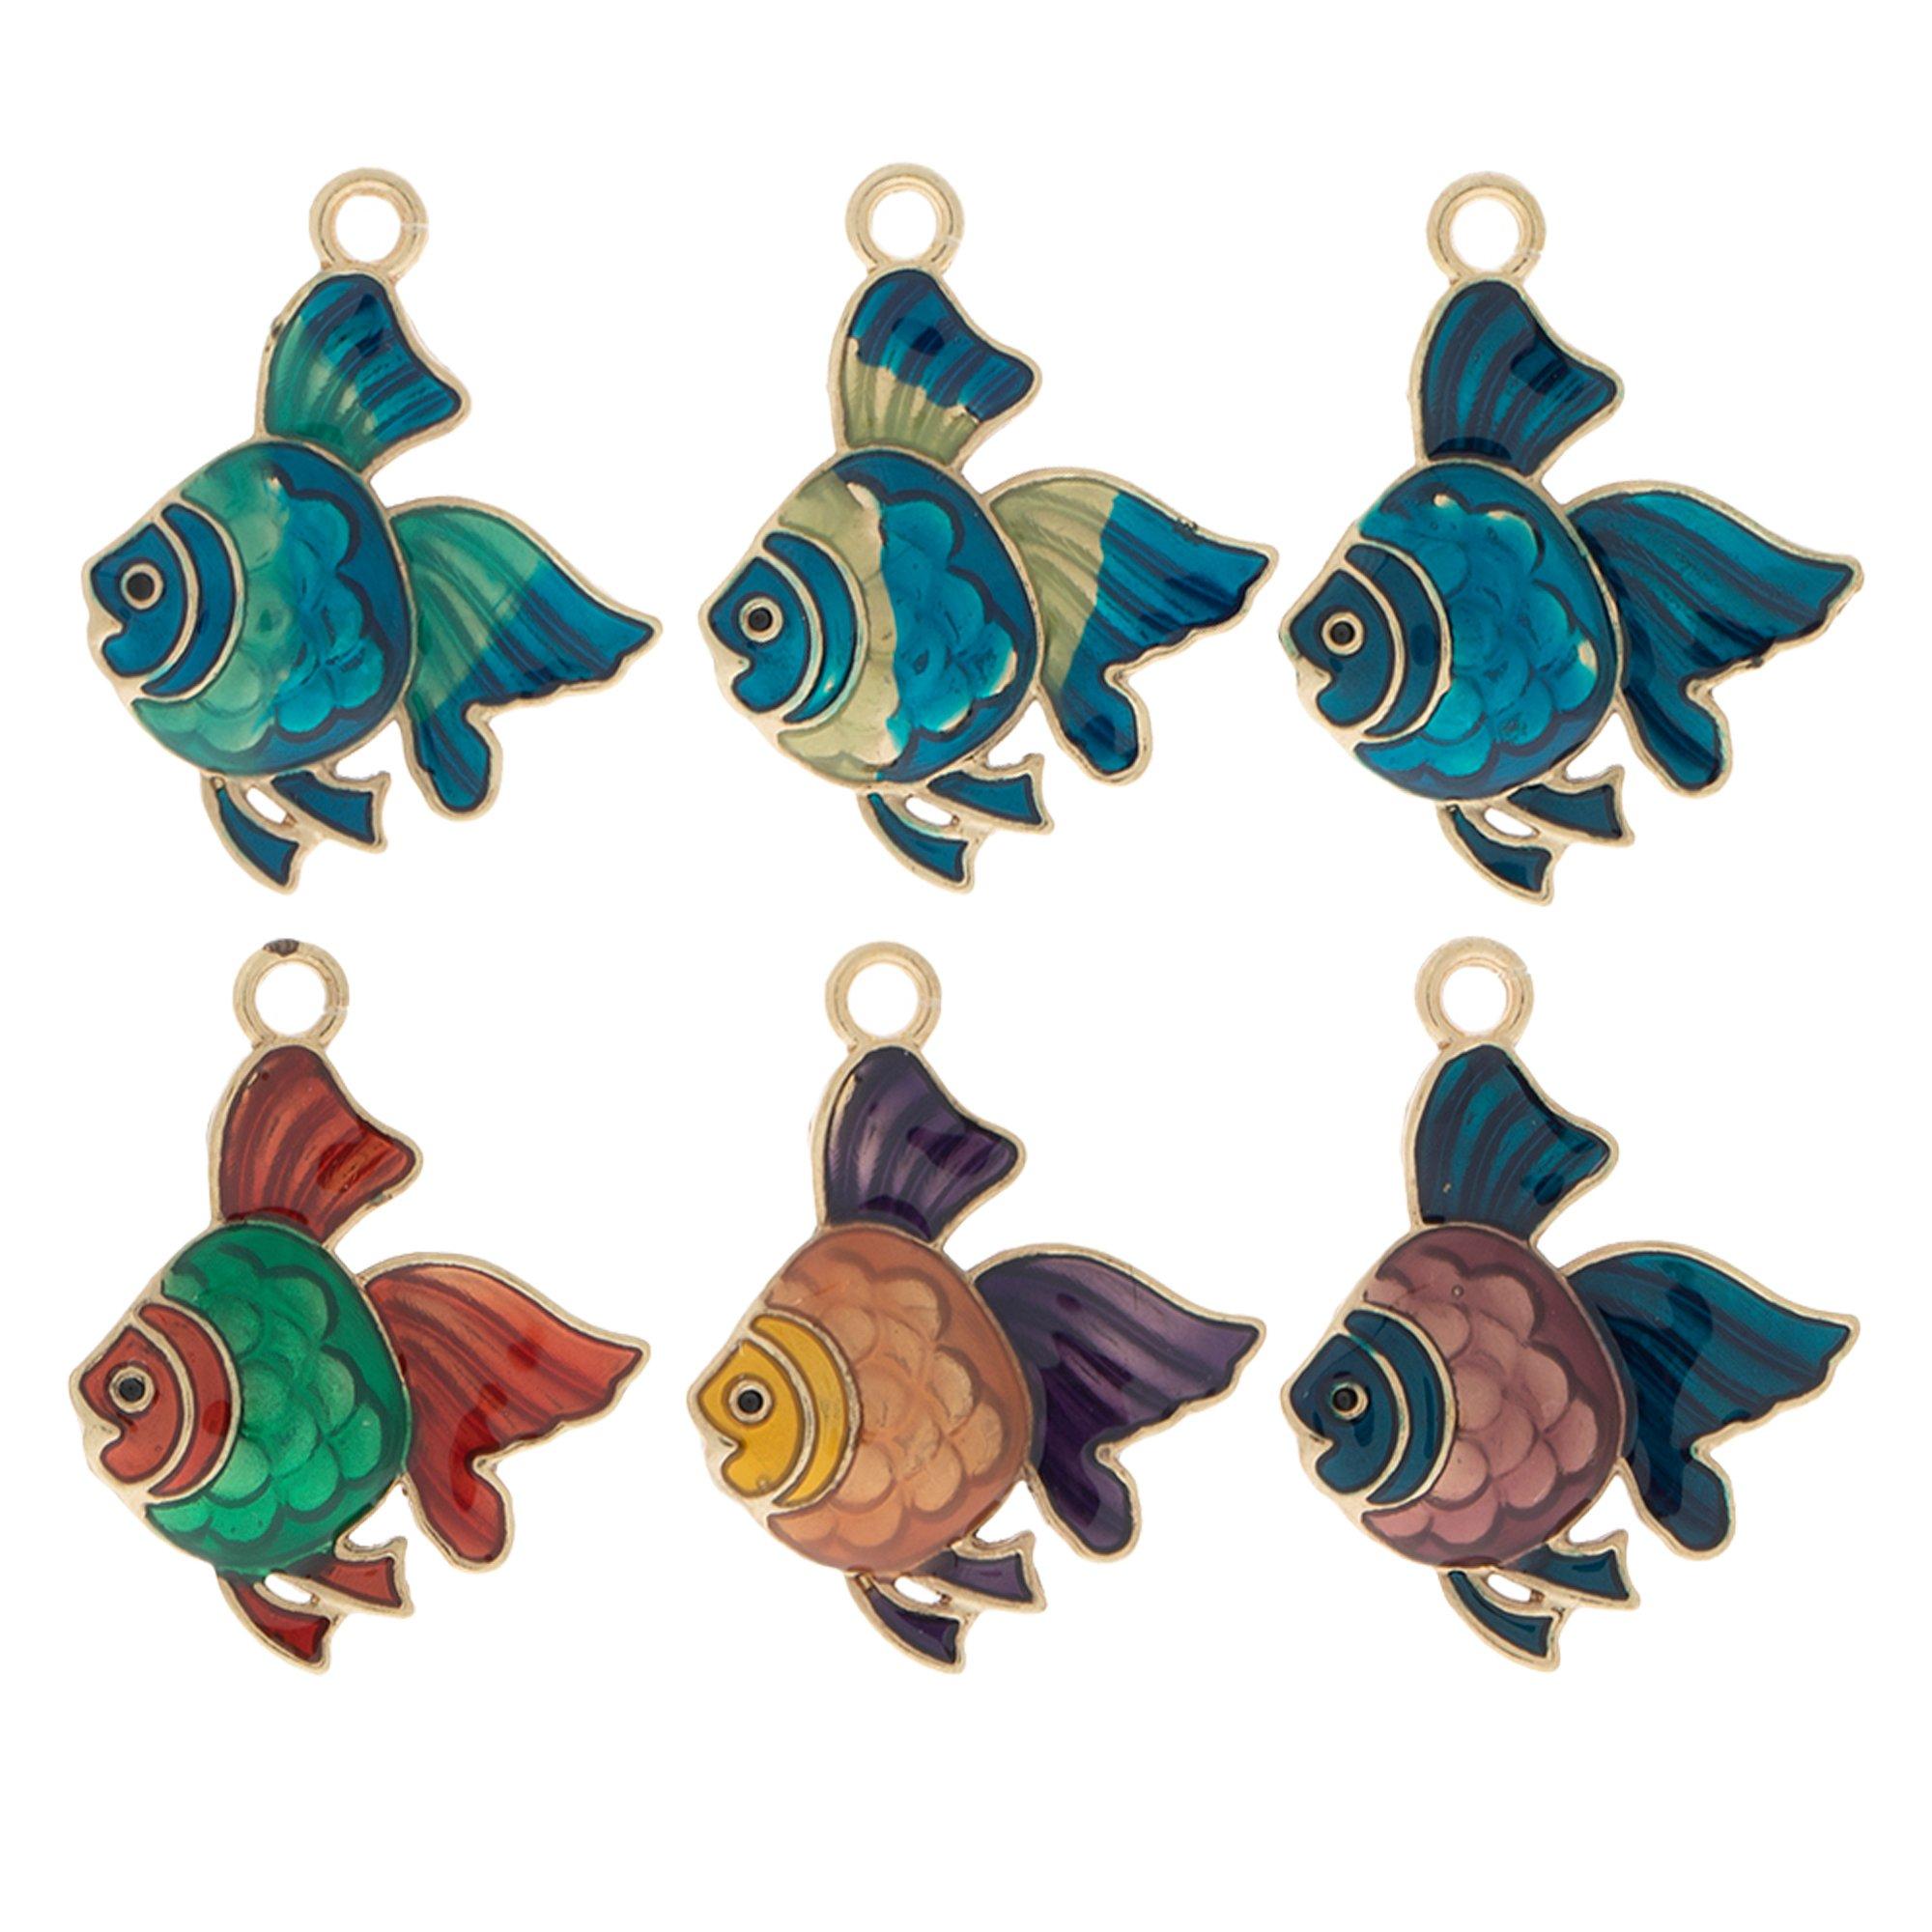  Magibeads 36Pcs Enamel Fish Charms Light Gold Alloy Animal  Pendants Sea Creatures Anemone Small Cute Charms for Crafts DIY Earring  Jewelry Making Supplies : Arts, Crafts & Sewing